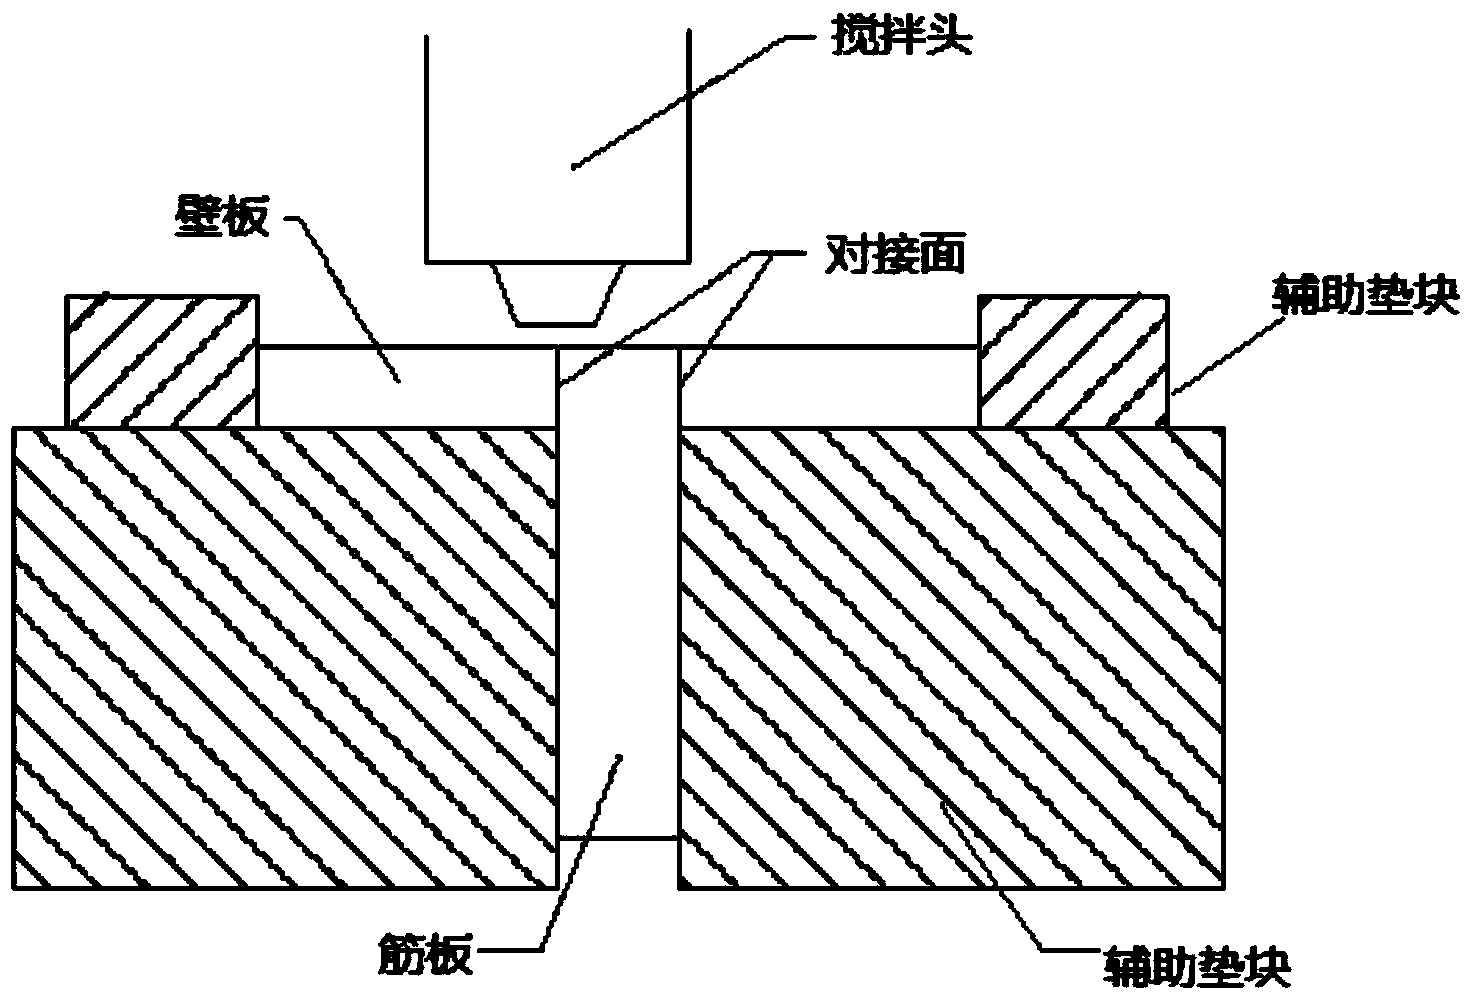 Method for T-shaped magnesium alloy section friction stir welding